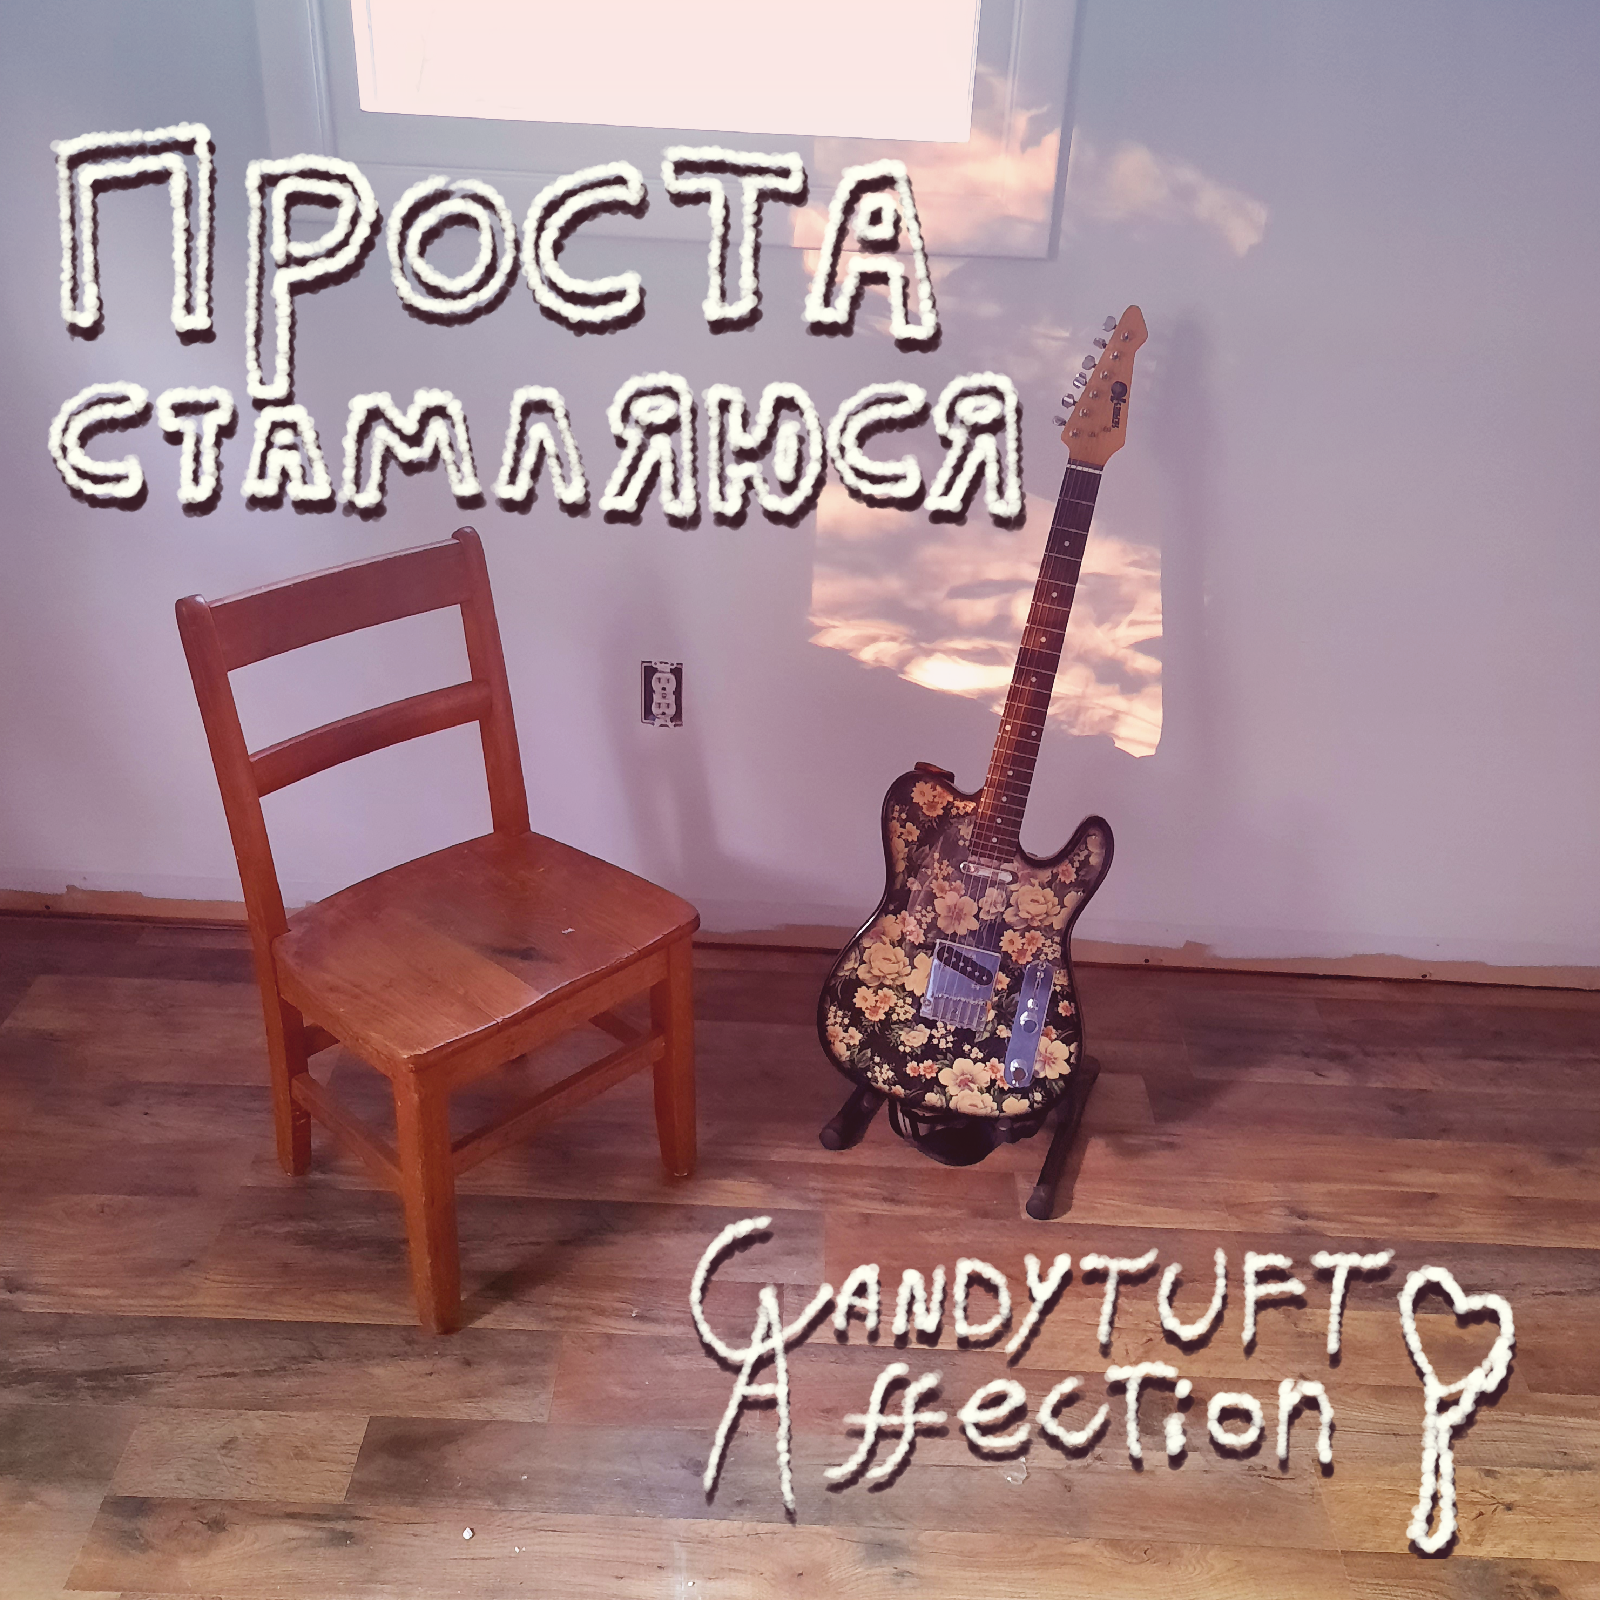 Image of an empty chair and a black electric guitar with a flower design next to it. Проста стамнляюся is written in the upper left-hand corner, and the Candytuft Affection logo is on the bottom right-hand side.